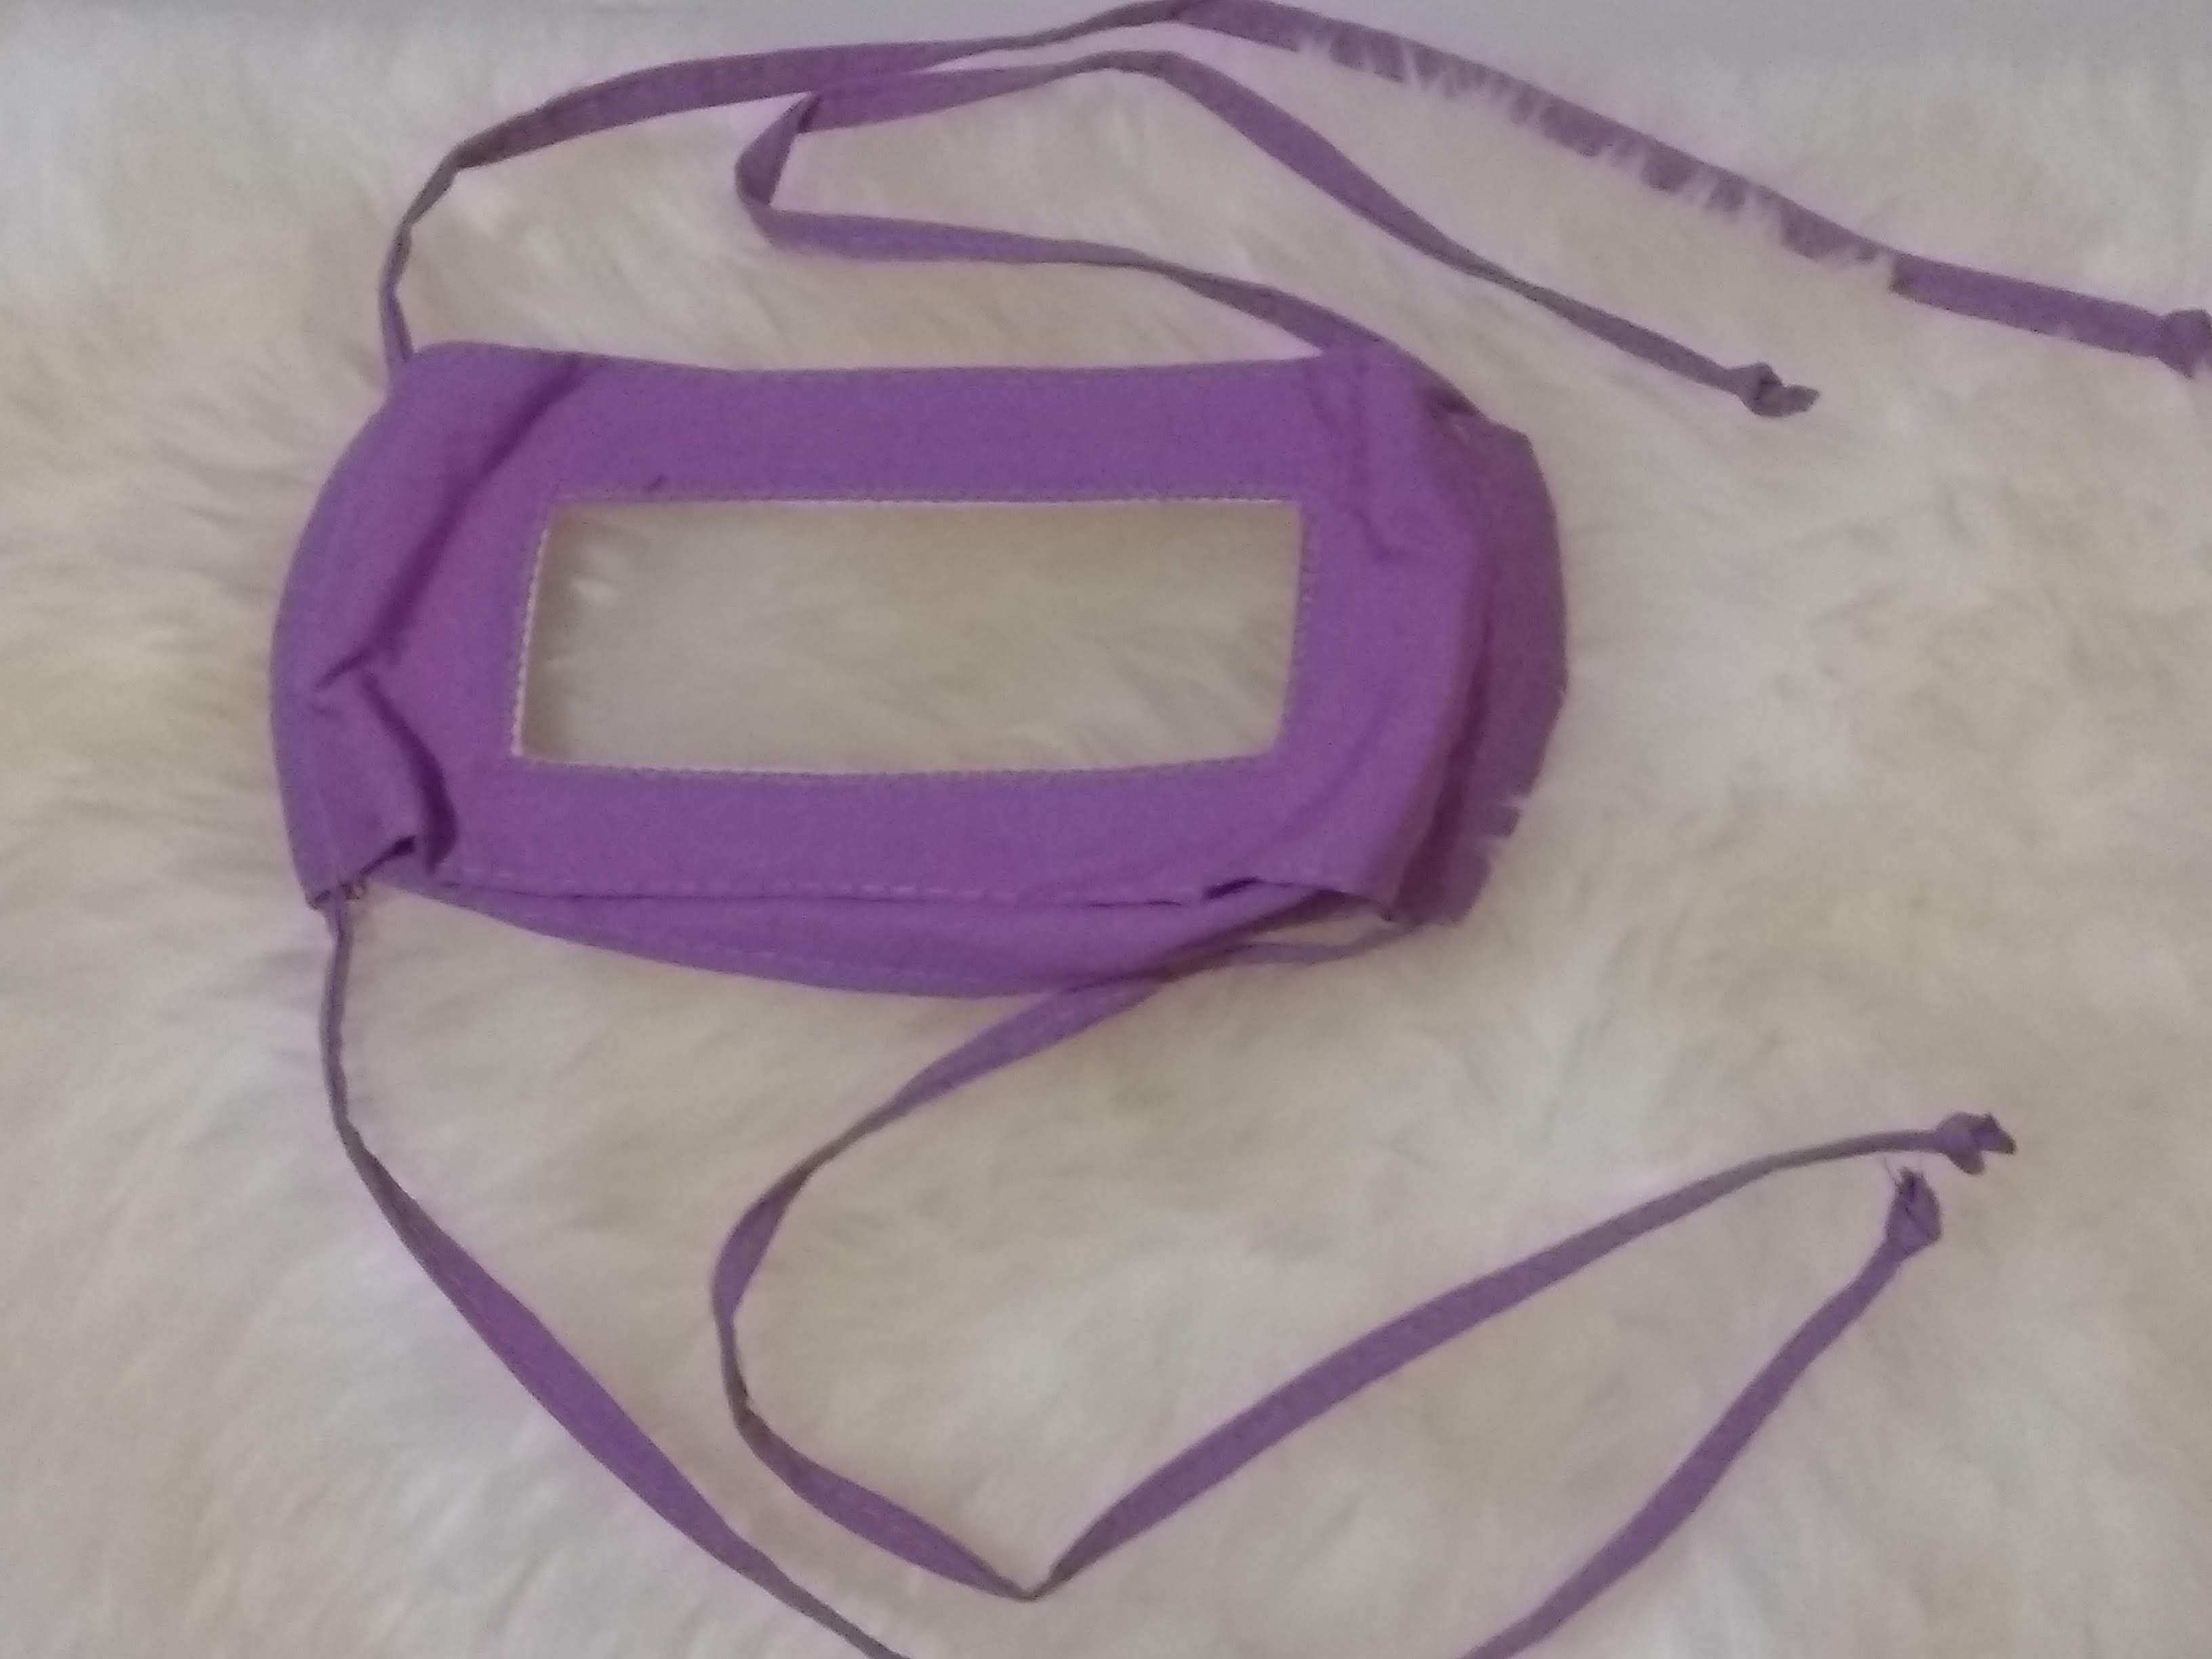 Image of the windowed face mask in purple.